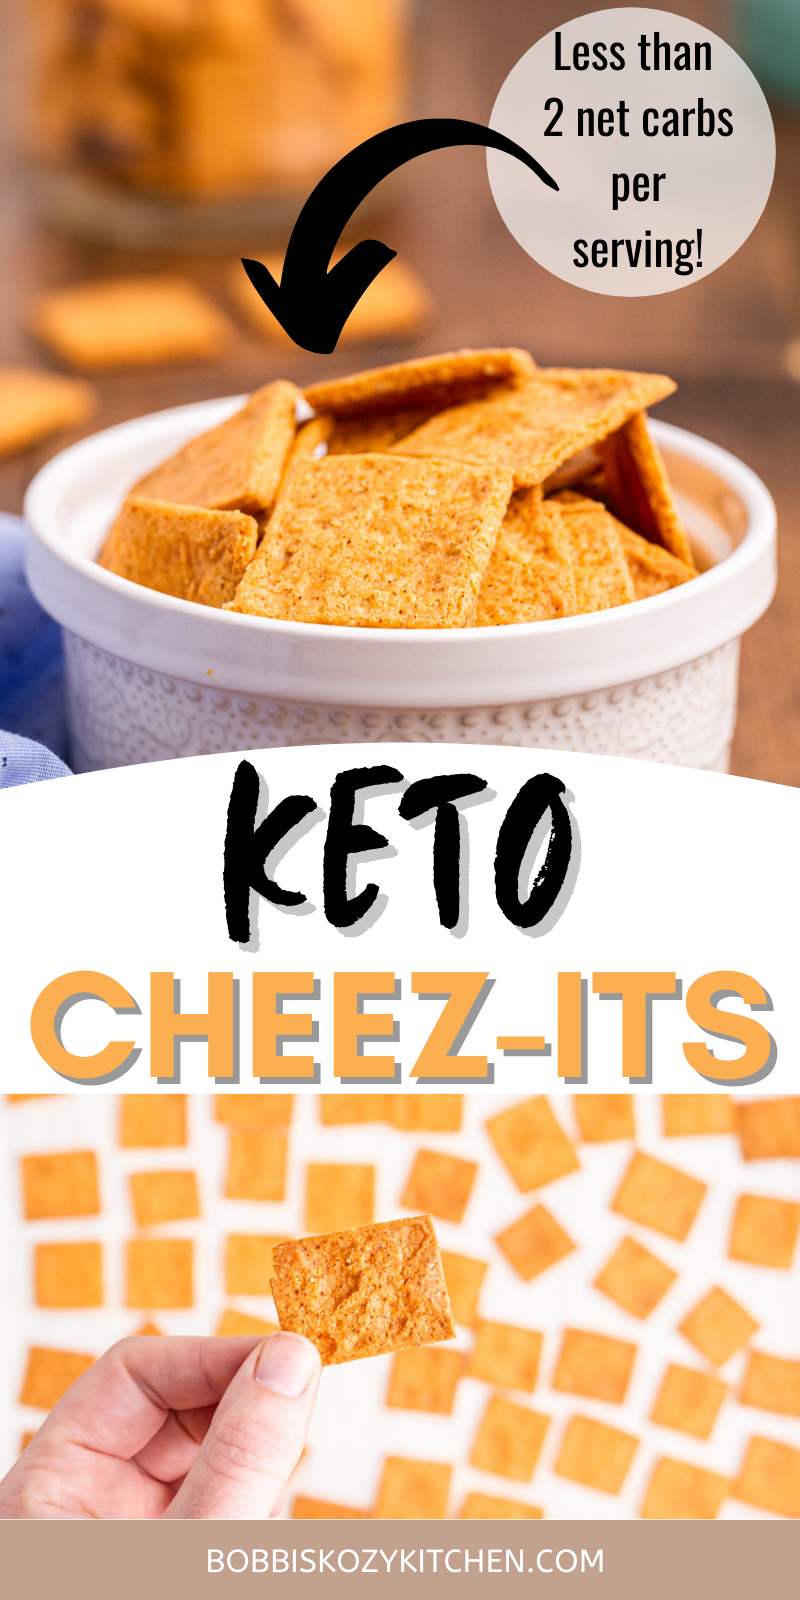 Keto Smoked Cheddar Crackers (Cheez-Its) - These keto "Cheez-It" crackers are made with superfine almond flour and cheese, then baked to crunchy perfection! With only 3 main ingredients, they are an easy low carb way to enjoy your favorite cheesy cracker snack! #lowcarb #keto #glutenfree #dairyfree #vegetarian #cheezits #cheddar #smoked #crackers #snack #recipe